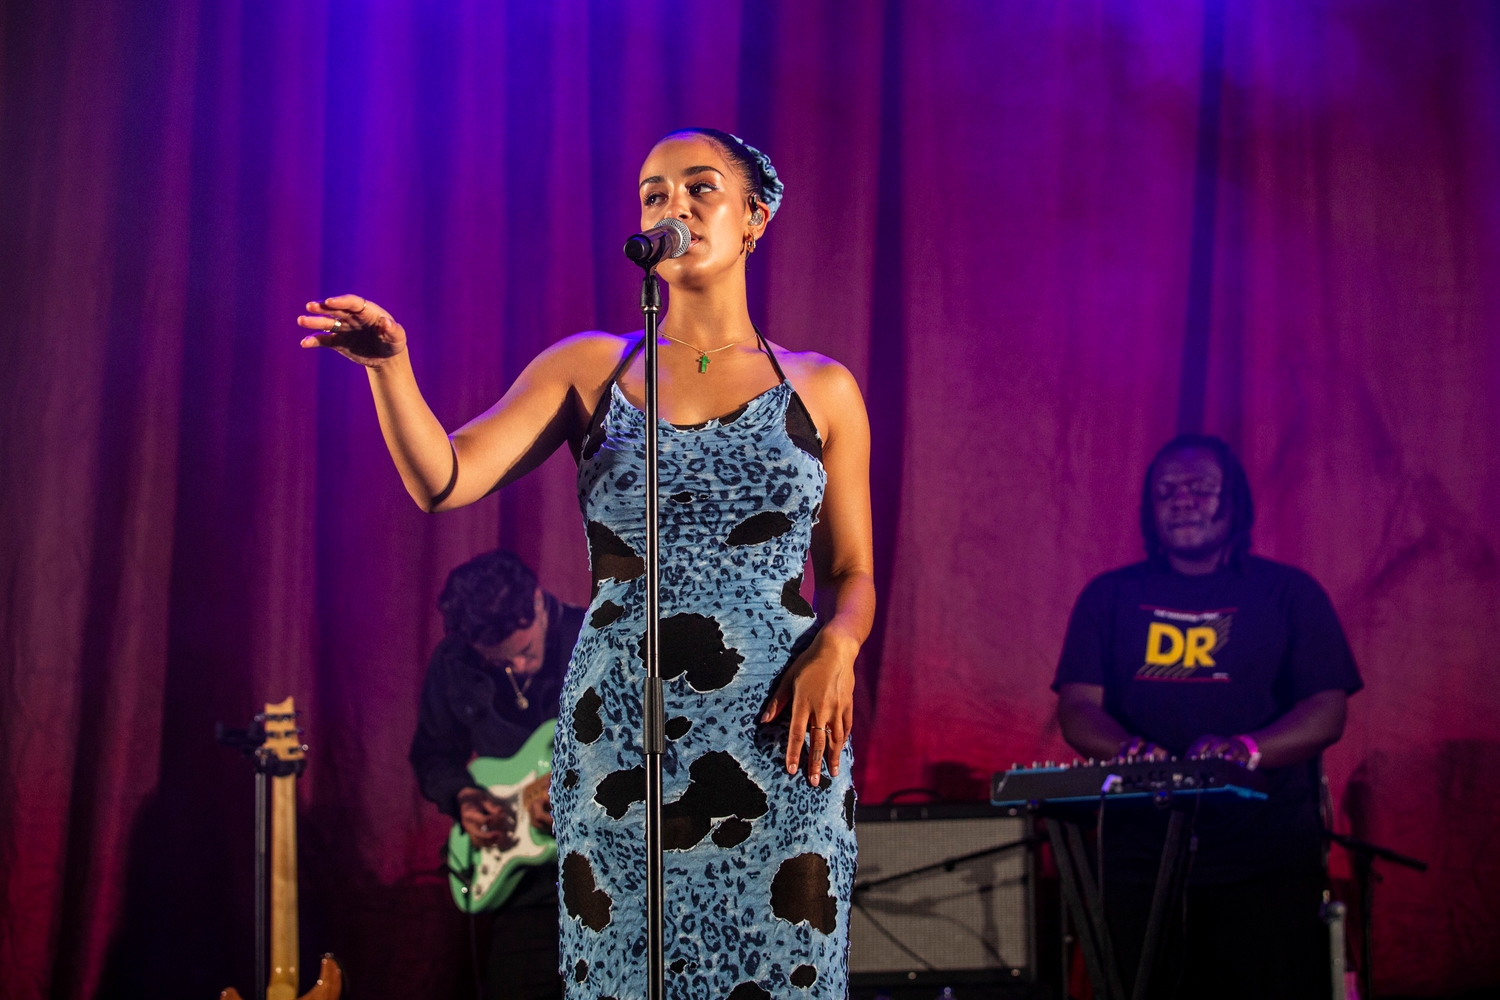 Jorja Smith heads up an eclectic first night of Bestival 2018